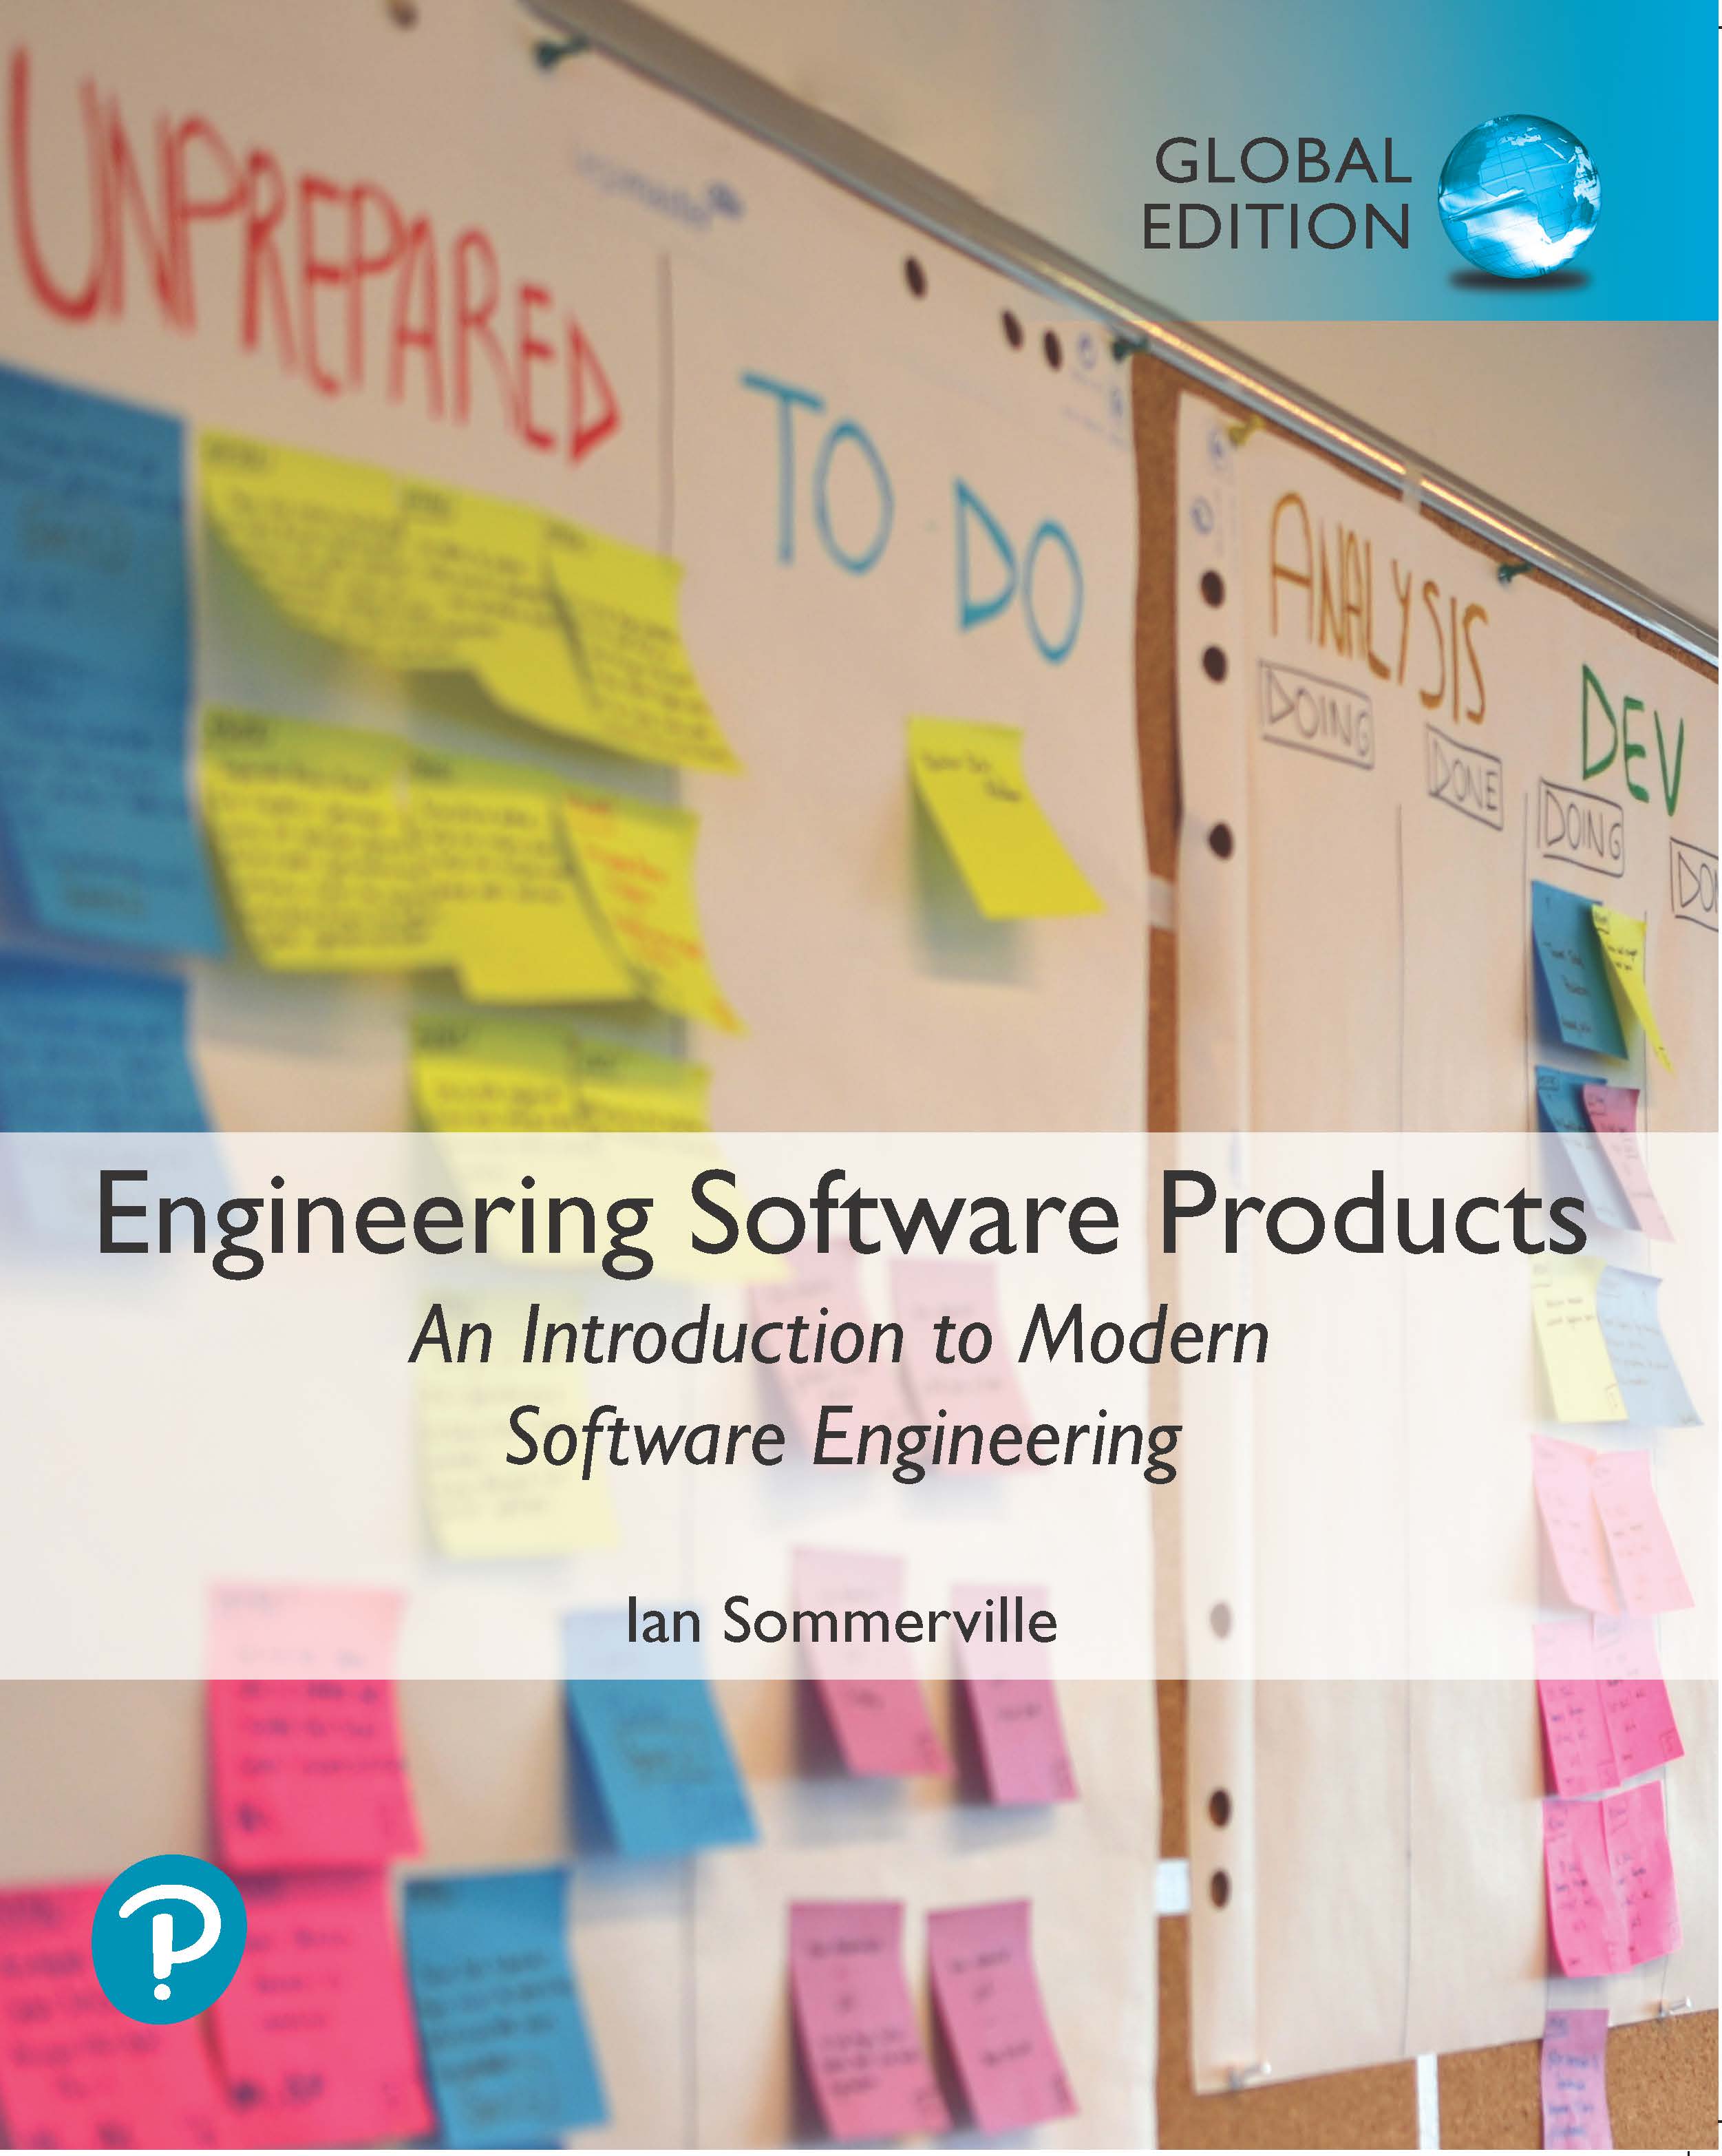 <img alt="Engineering Software Products: An Introduction to Modern Software Engineering, Ian Sommerville">